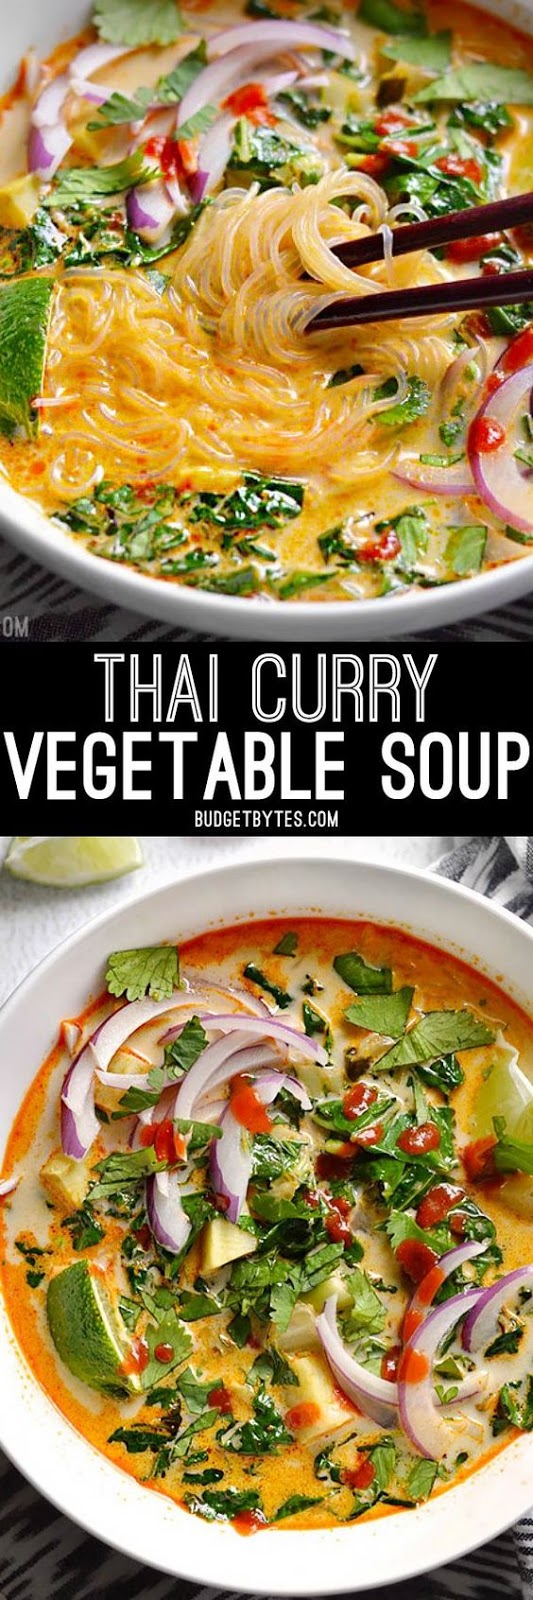 THAI CURRY VEGETABLE SOUP - BEST FOOD